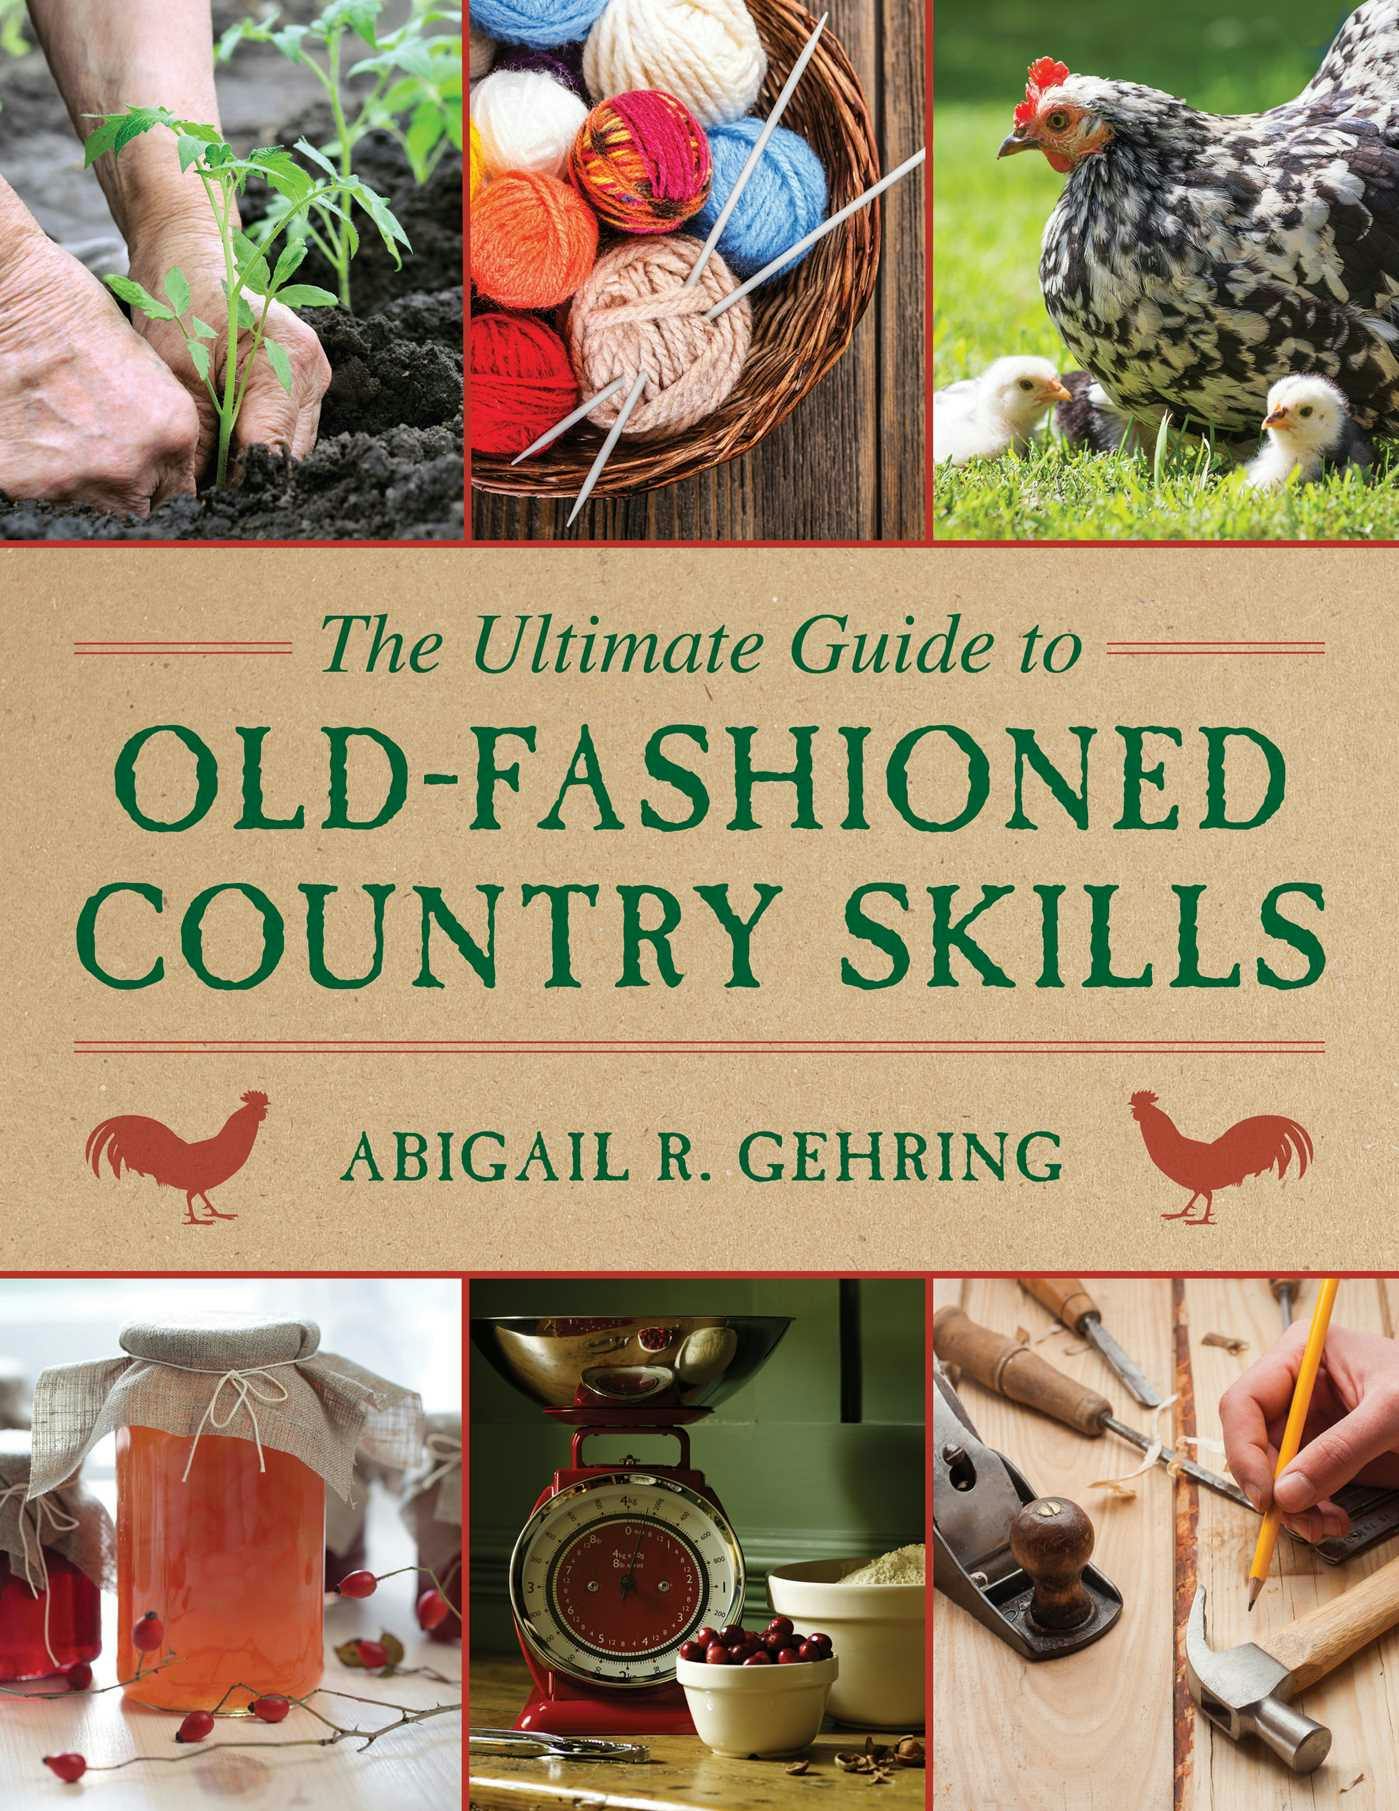 The Ultimate Guide to Old-Fashioned Country Skills - Abigail Gehring